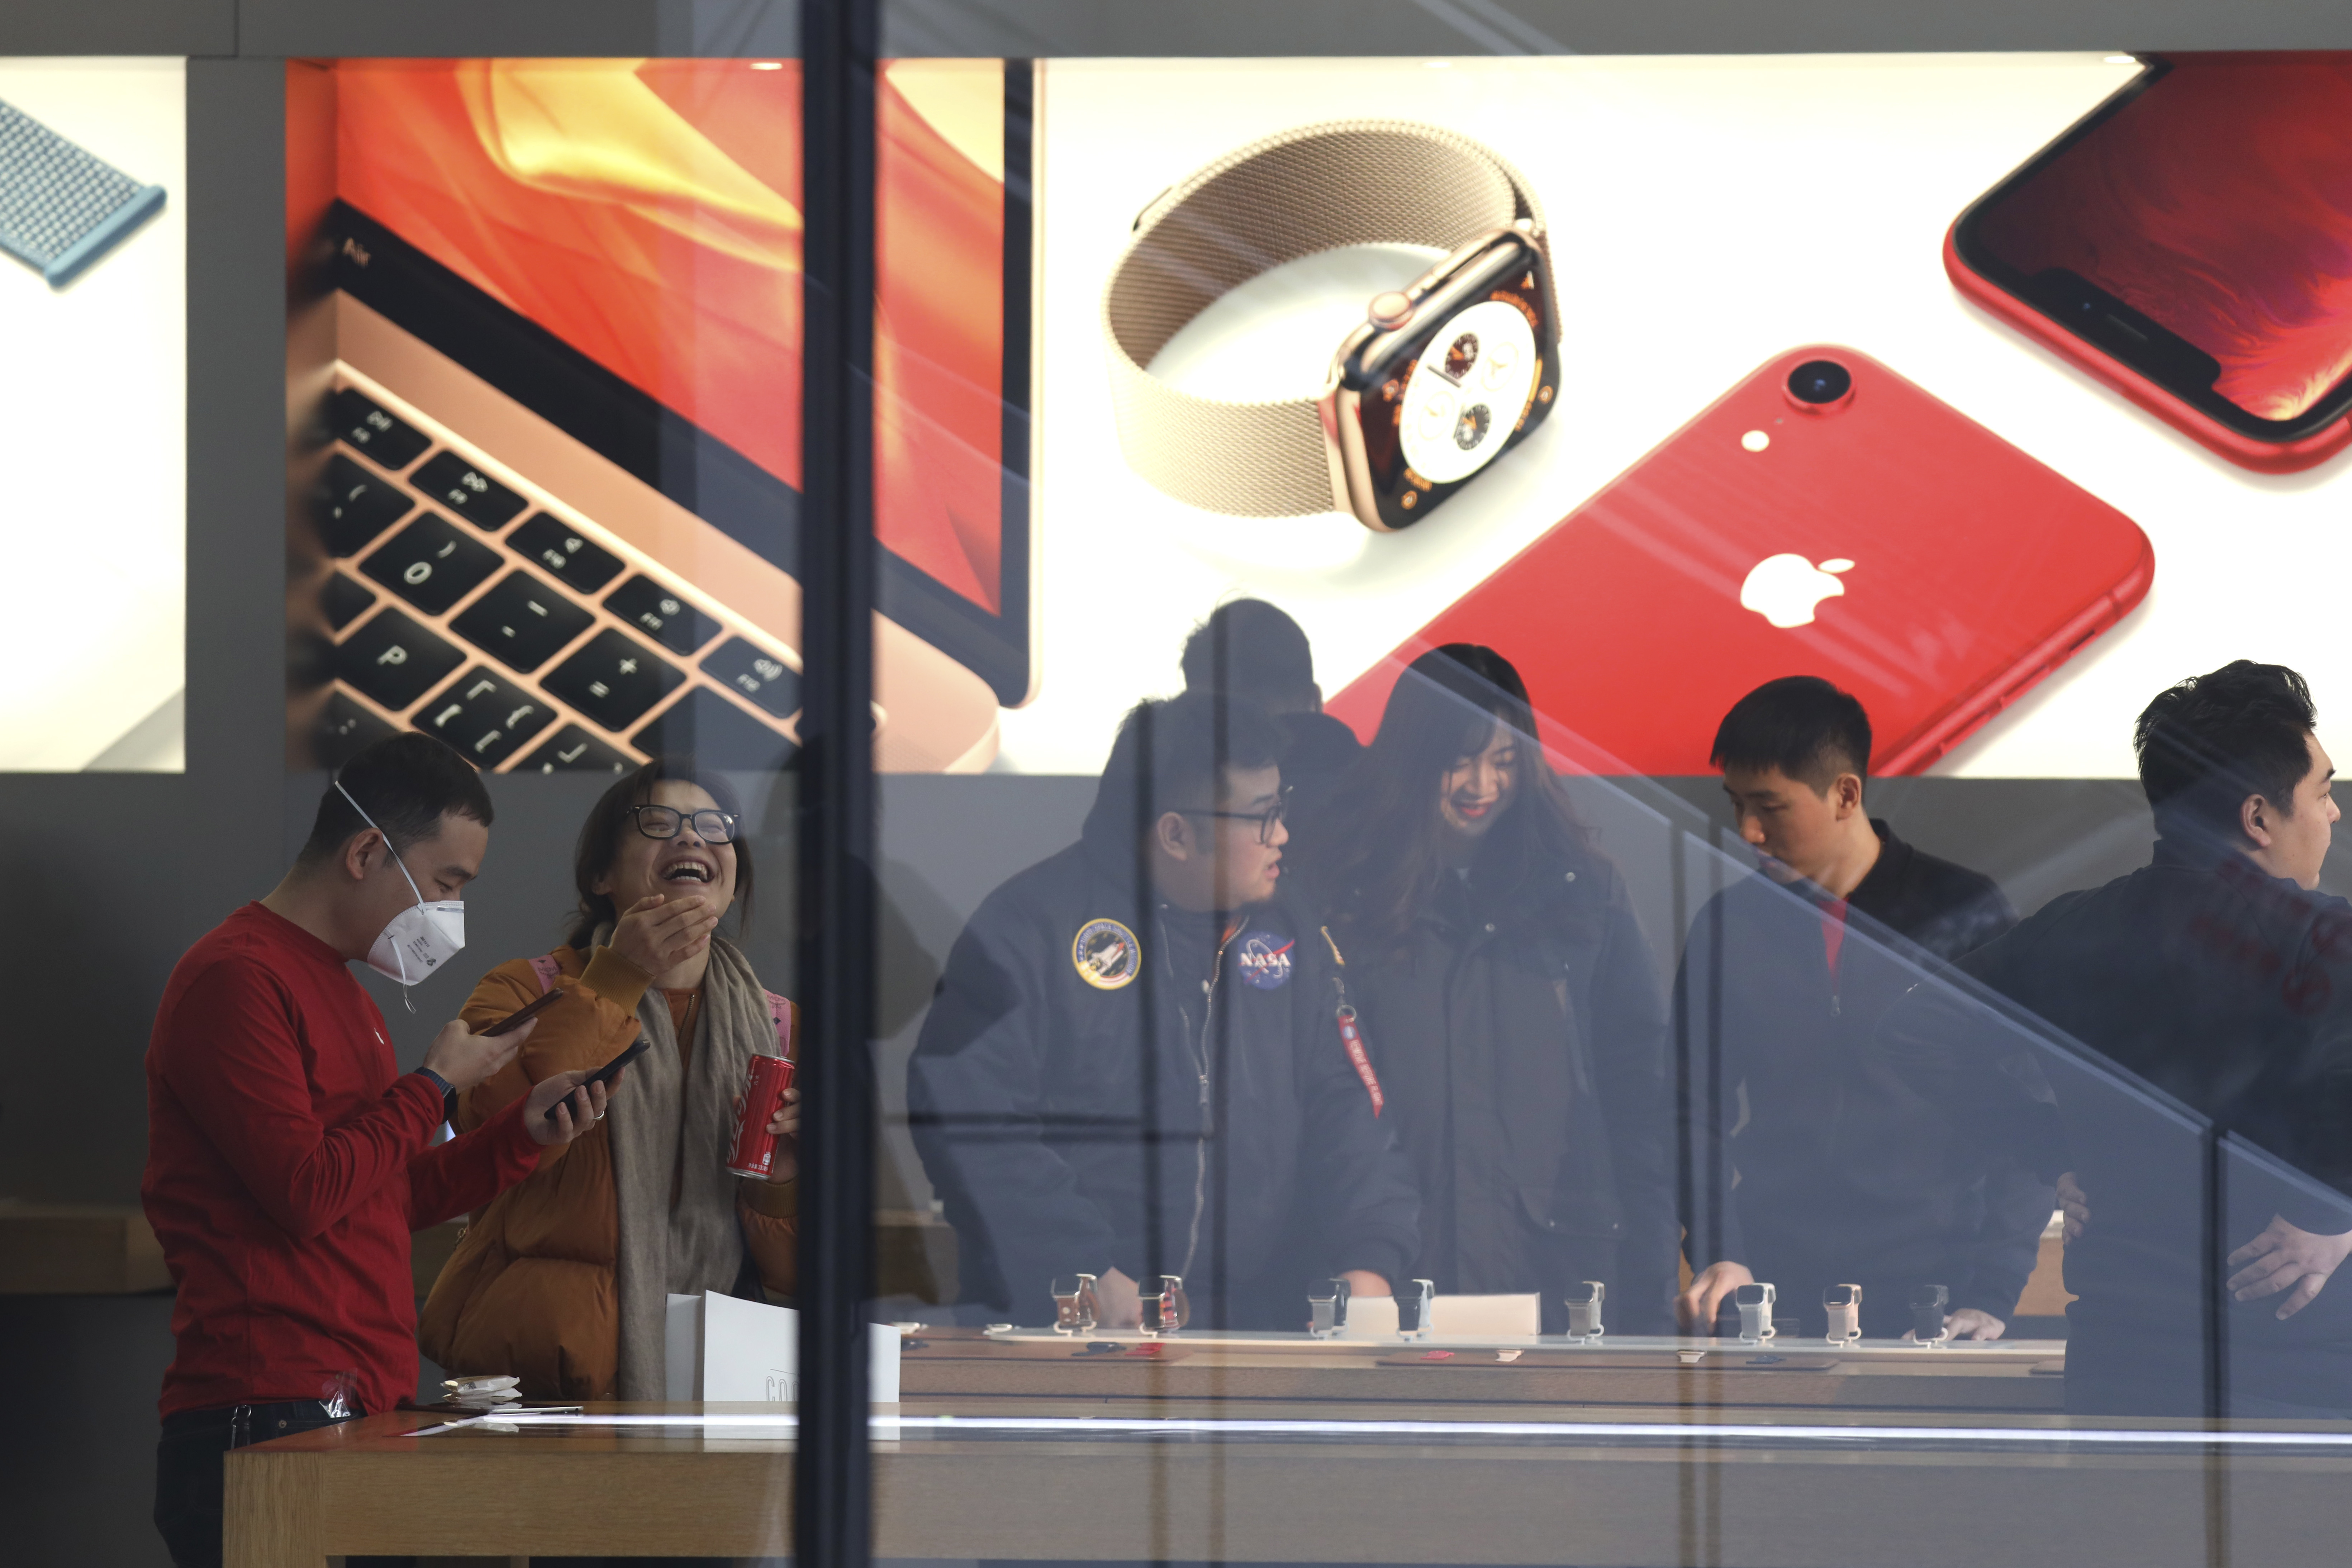 jammer kit online auction - Waning iPhone Demand Highlights Chinese Consumer Anxiety